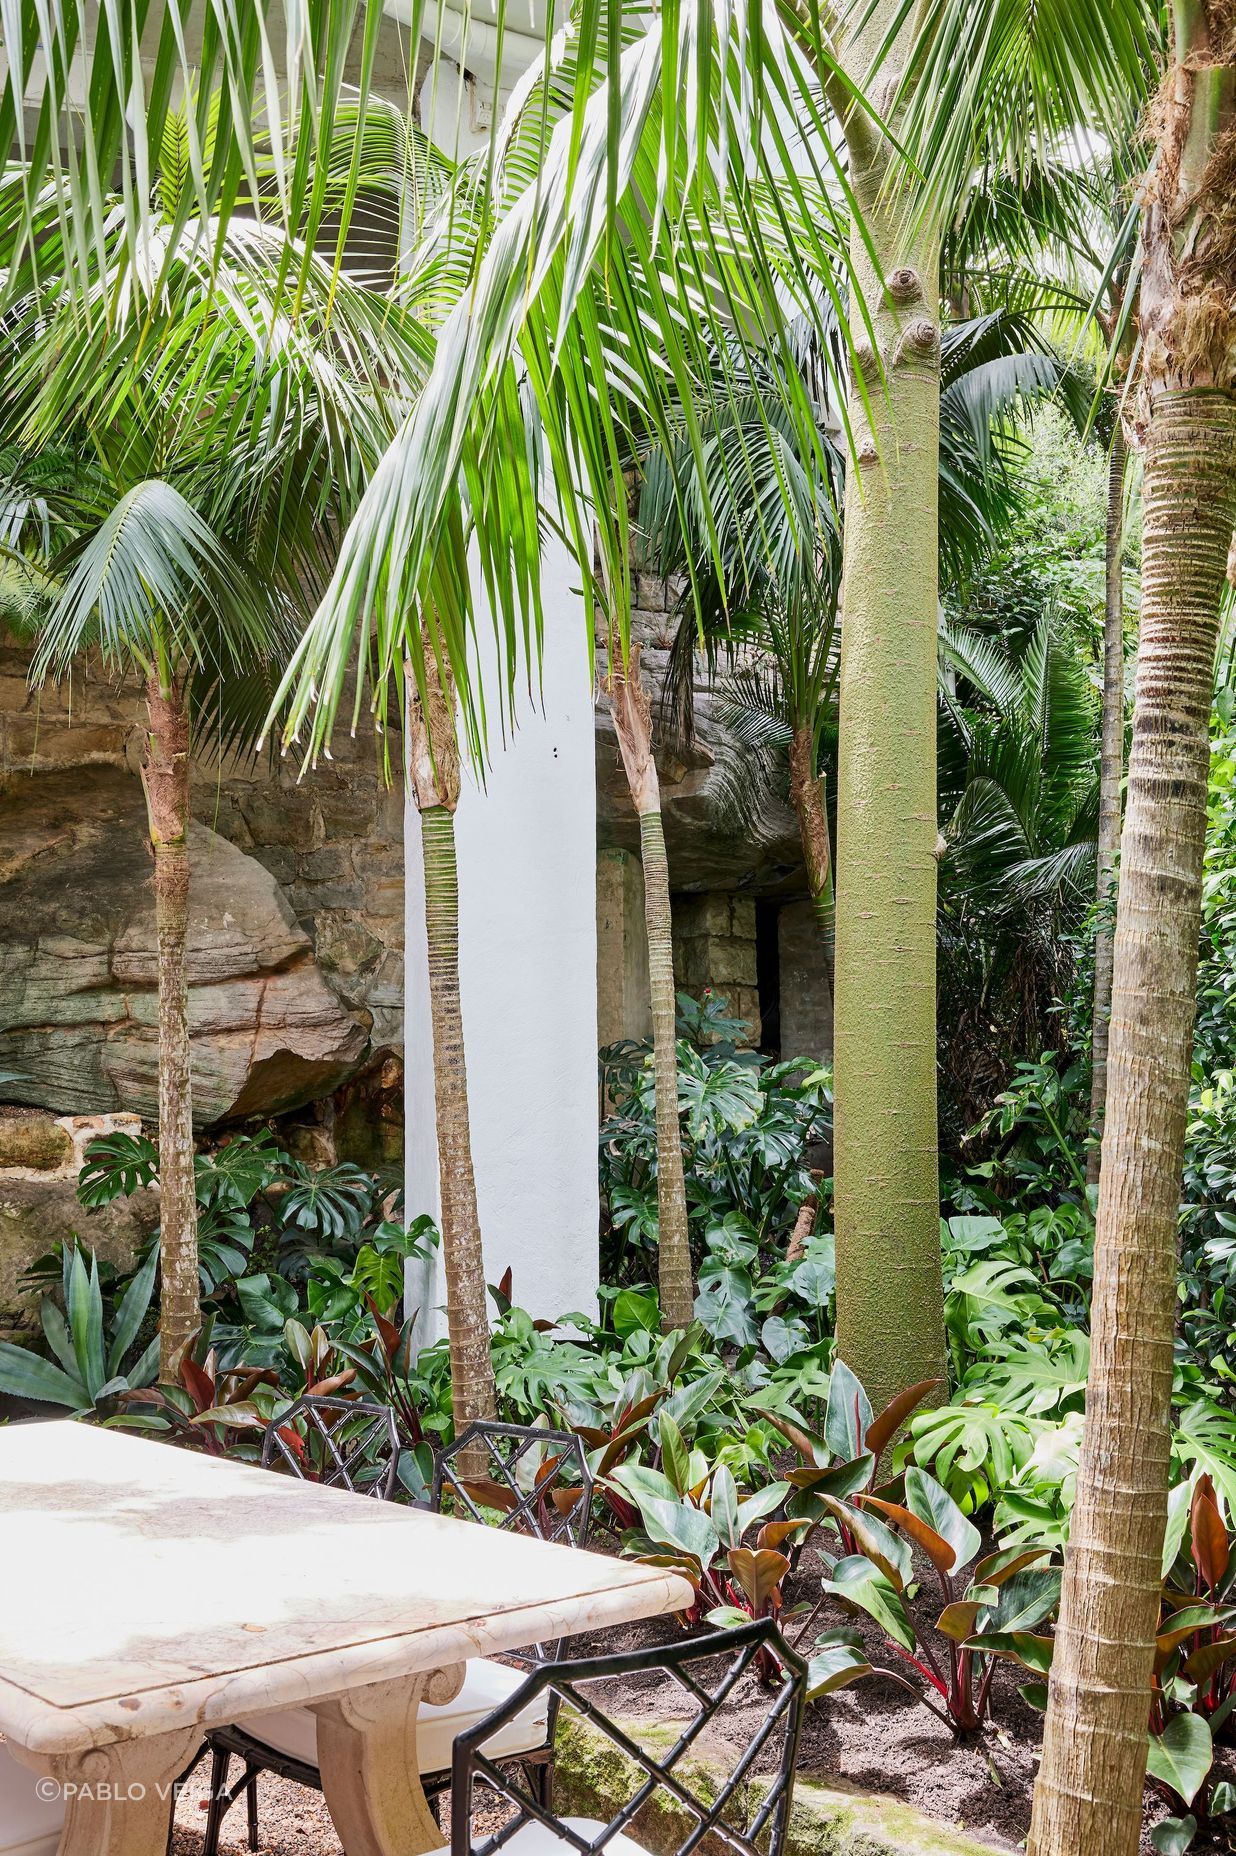 Now embedded in the hill, the home’s lush landscaping is central to its success with towering palm trees and a mix of native and exotic plants creating a sanctuary-like environment for its inhabitants.